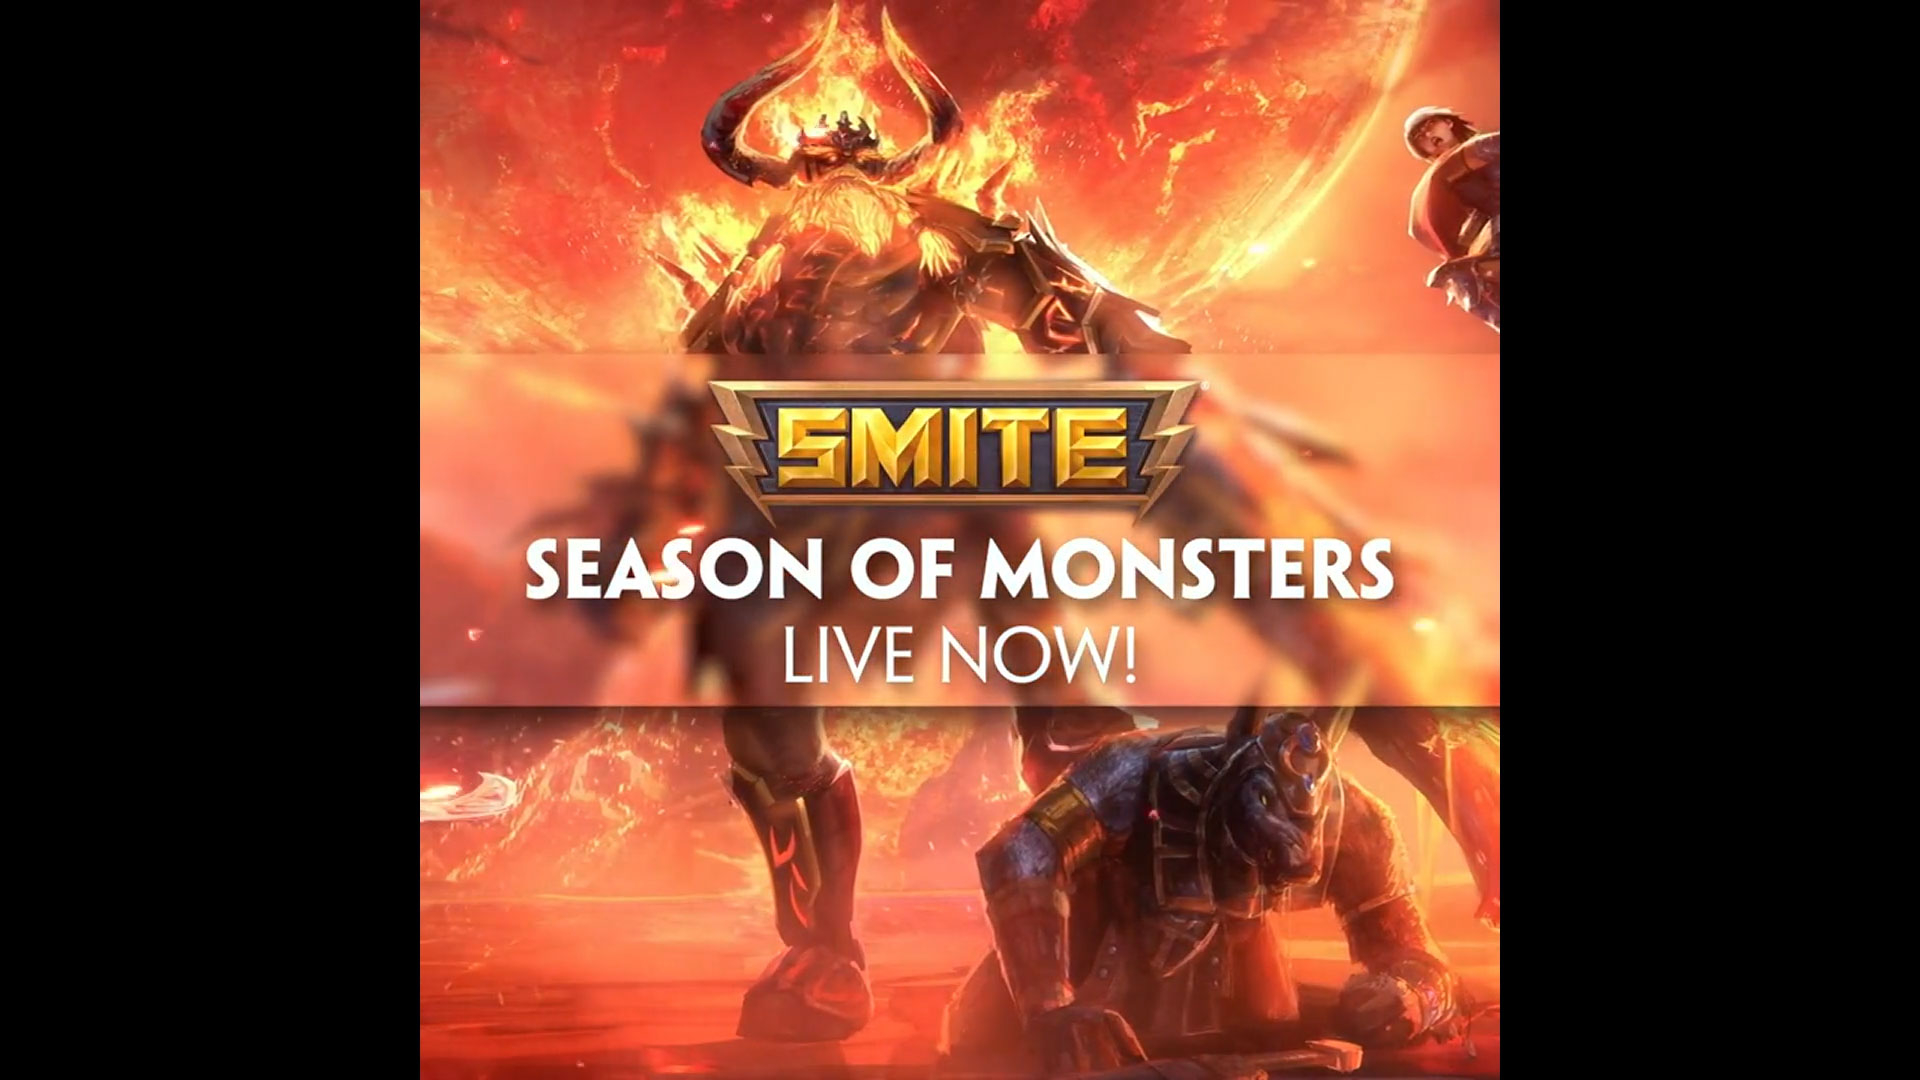 Hi-Rez kicked off their 10th year of SMITE with a personalized video for each player, recapping highlights from their last decade of gameplay and driving a 25x uplift in new users compared to channels without personalized video during the same campaign.